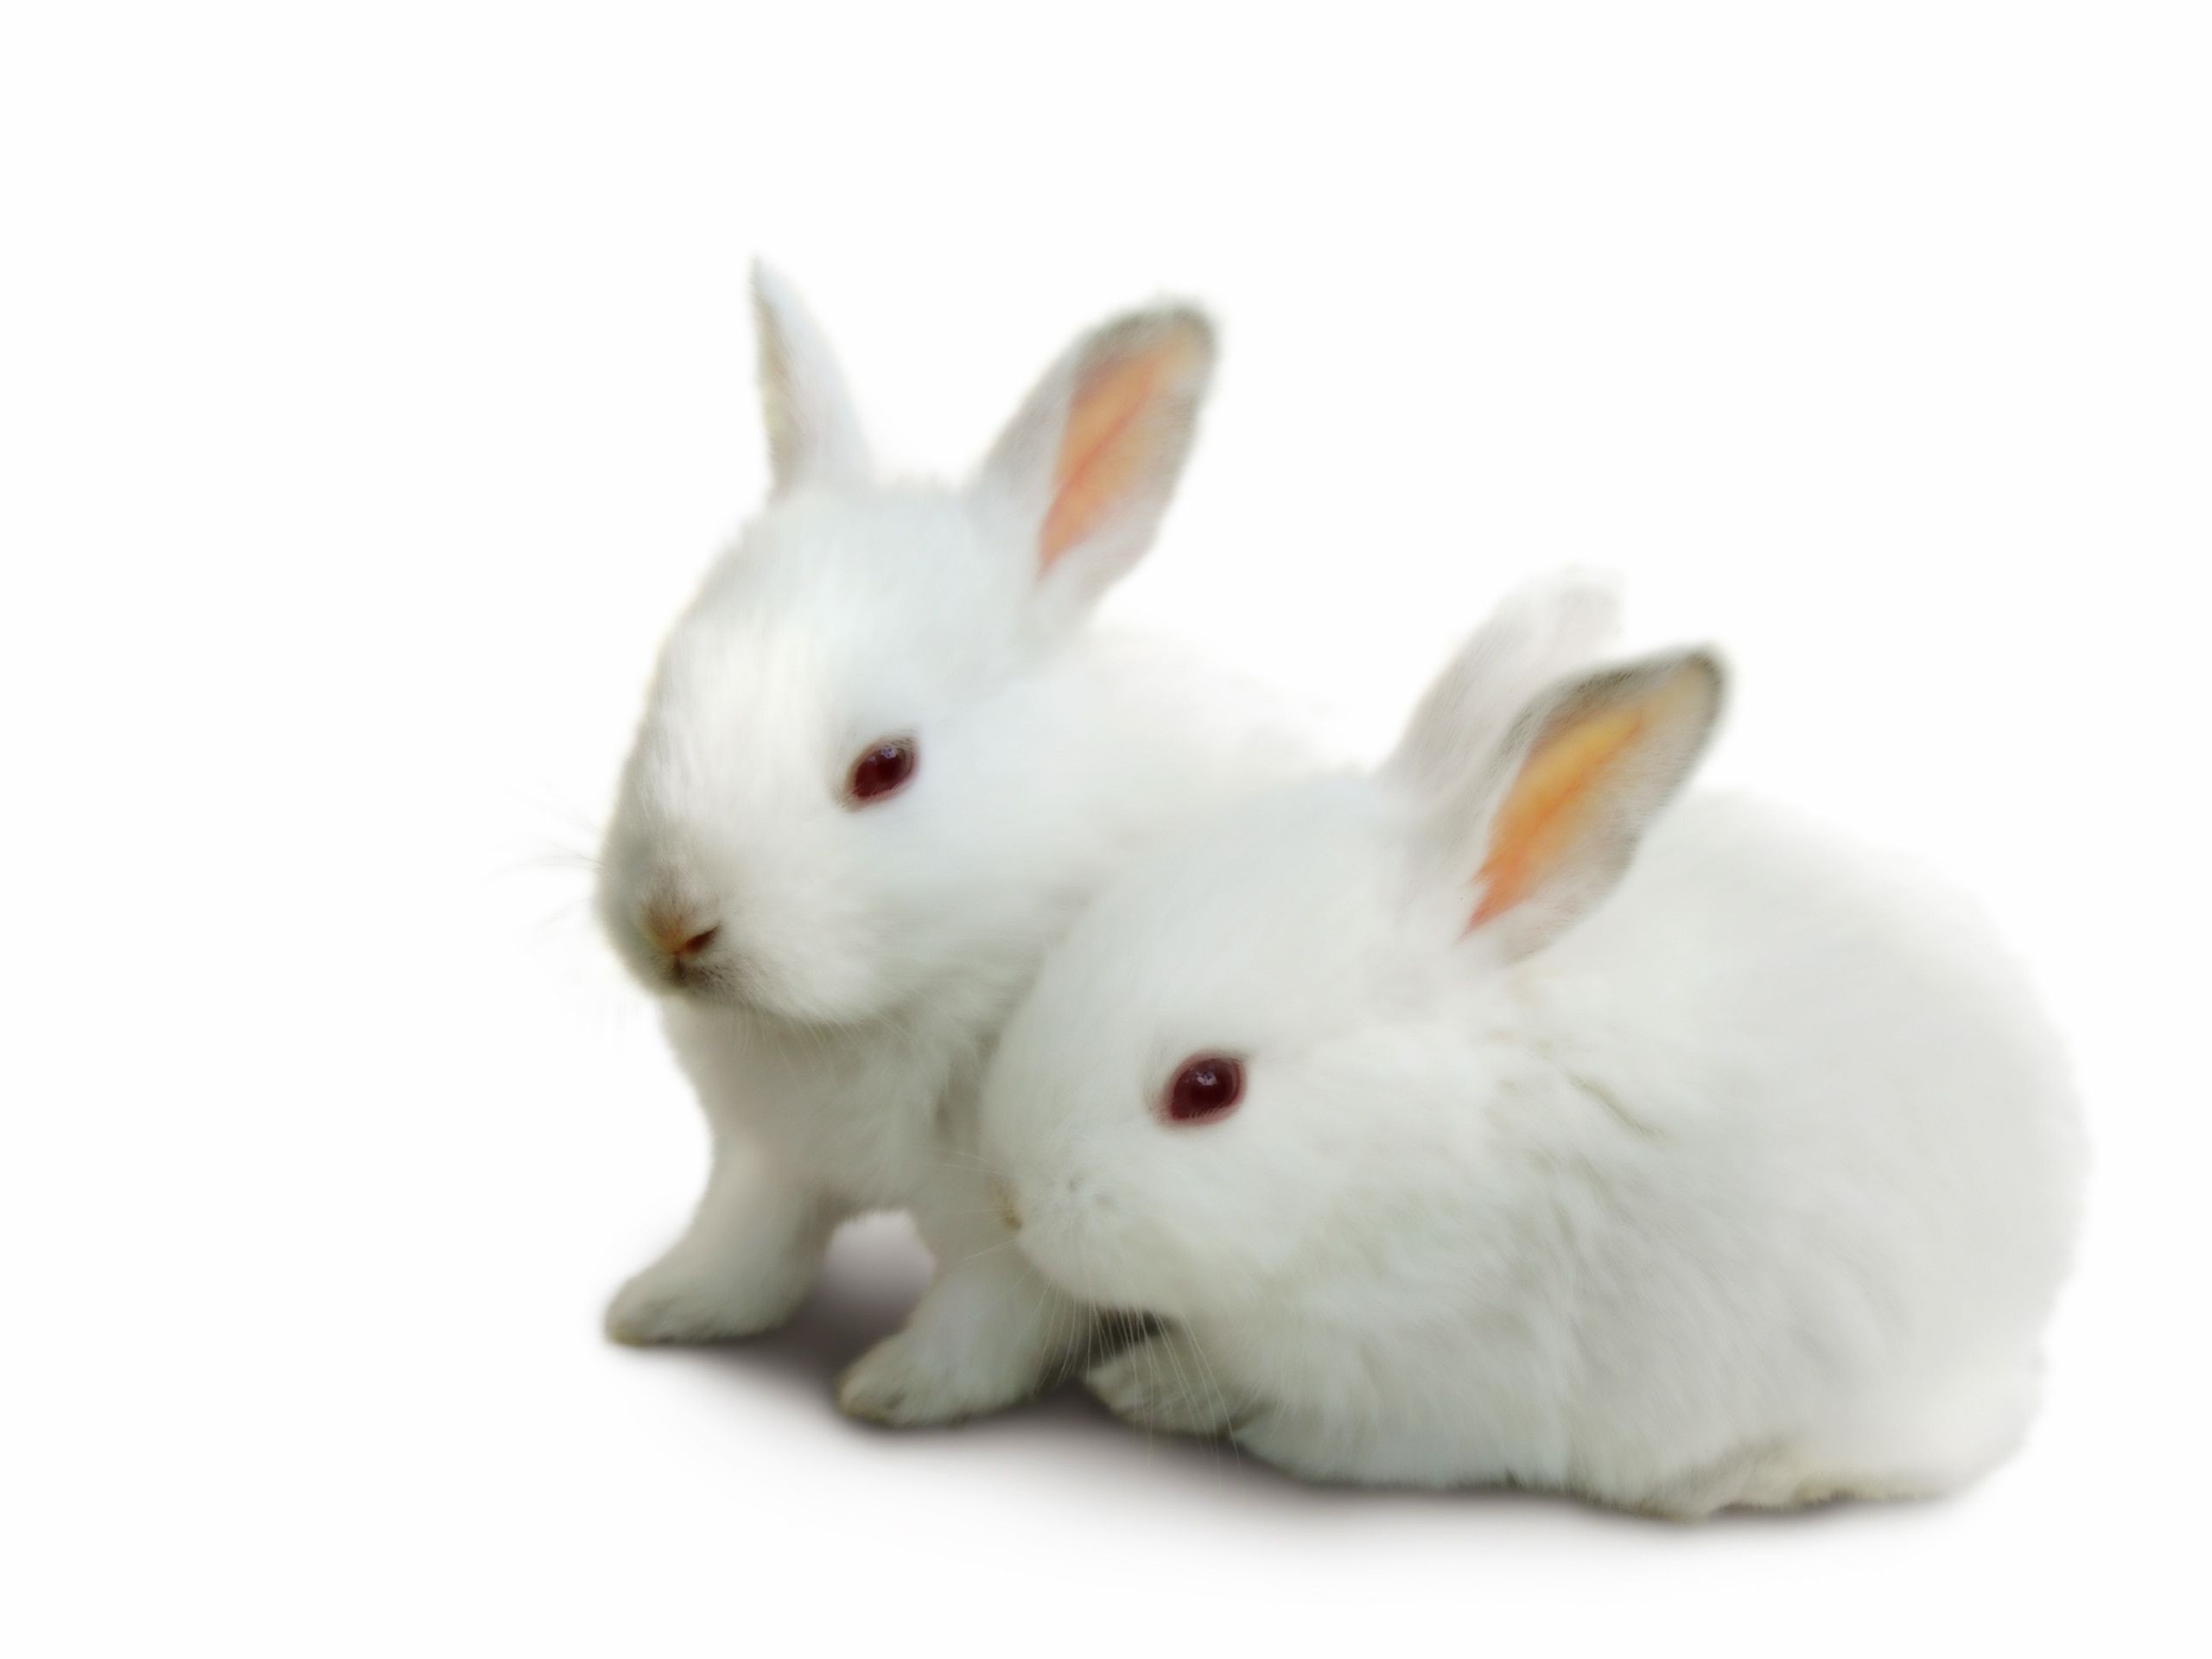 2560x1920 Top Beautiful And Cute Rabbit Wallpapers In HD Rabbit Wallpaper, Baby  Wallpaper, Cute Bunny